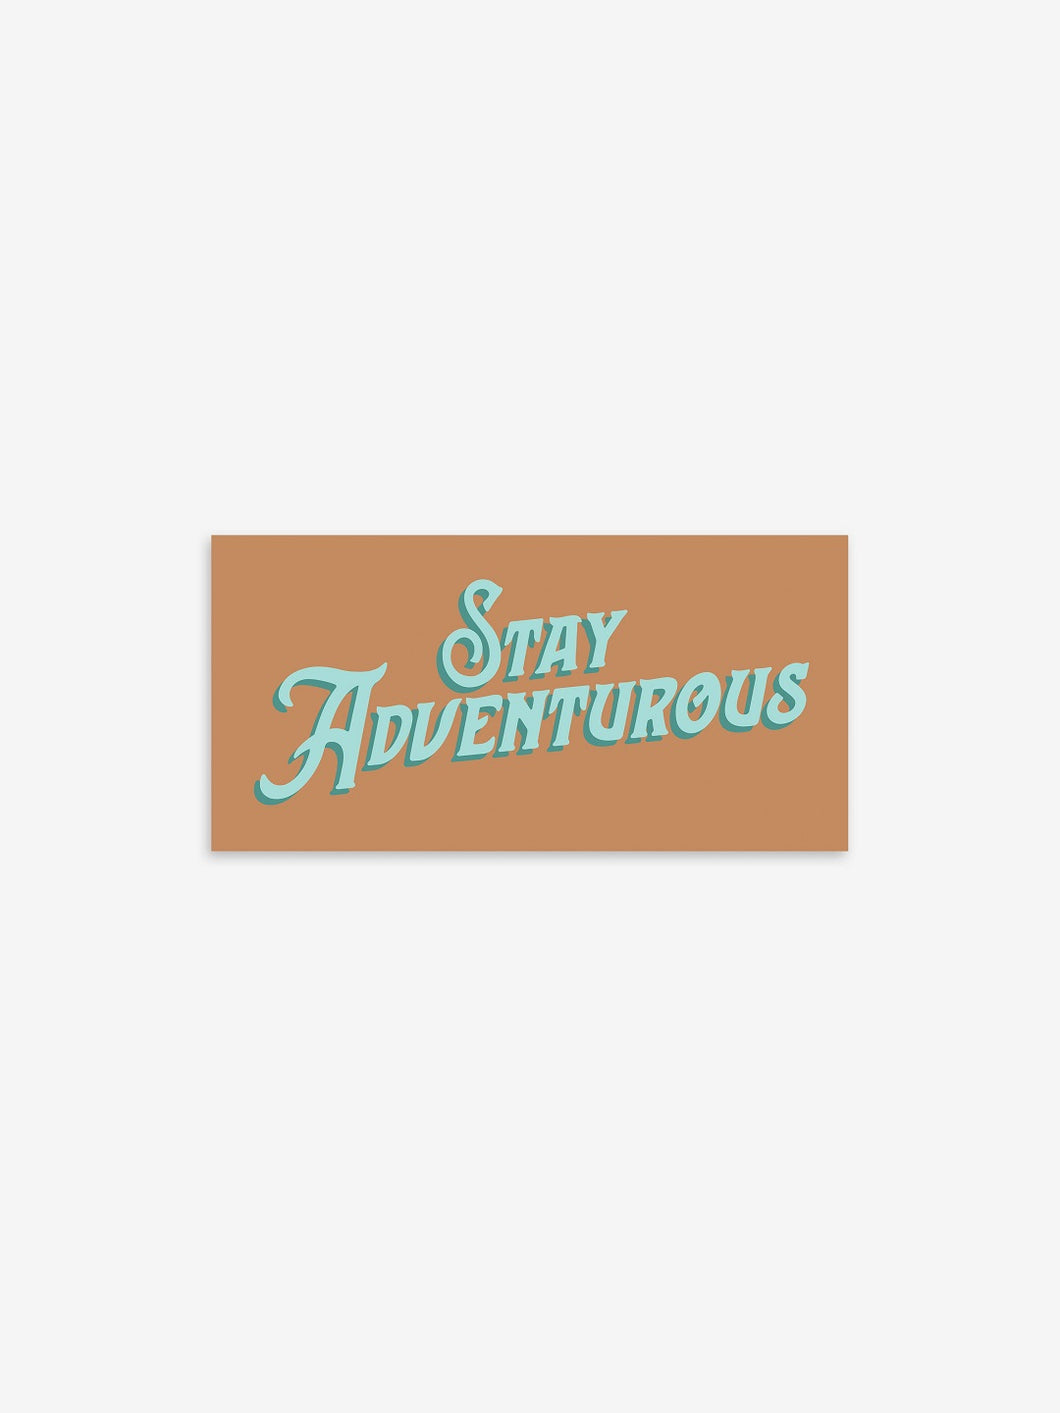 Pictured is a peach-coloured rectangular sticker with the words Stay Adventurous in teal. Perfect to show your passion for outdoor roof top tent camping! Available for sale by SMRT Tent in Denver, Colorado, USA.